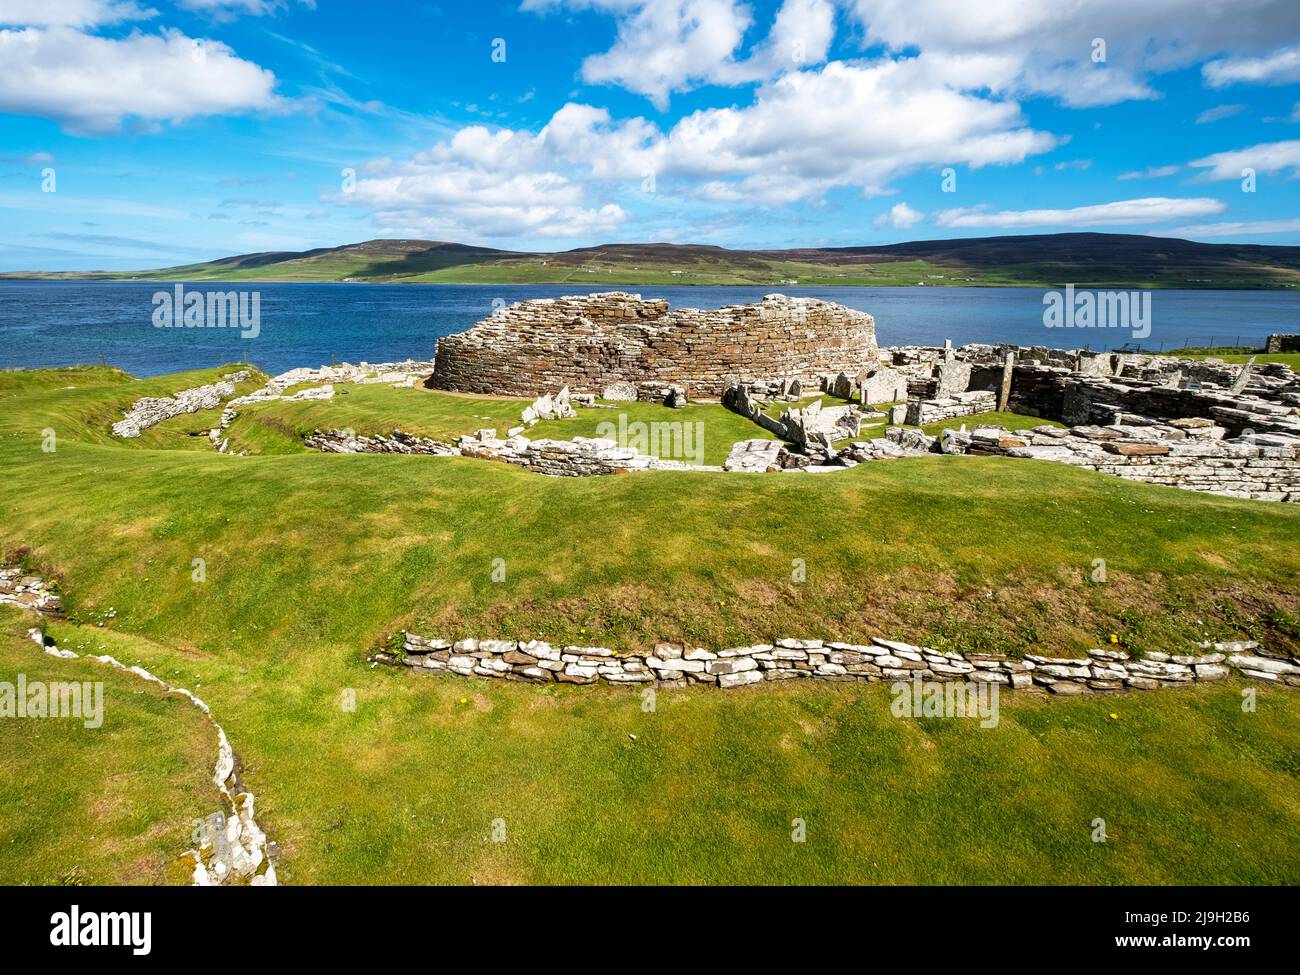 The Broch of Gurness is an Iron Age broch village on the northeast coast of Mainland Orkney in Scotland overlooking Eynhallow Sound. Stock Photo